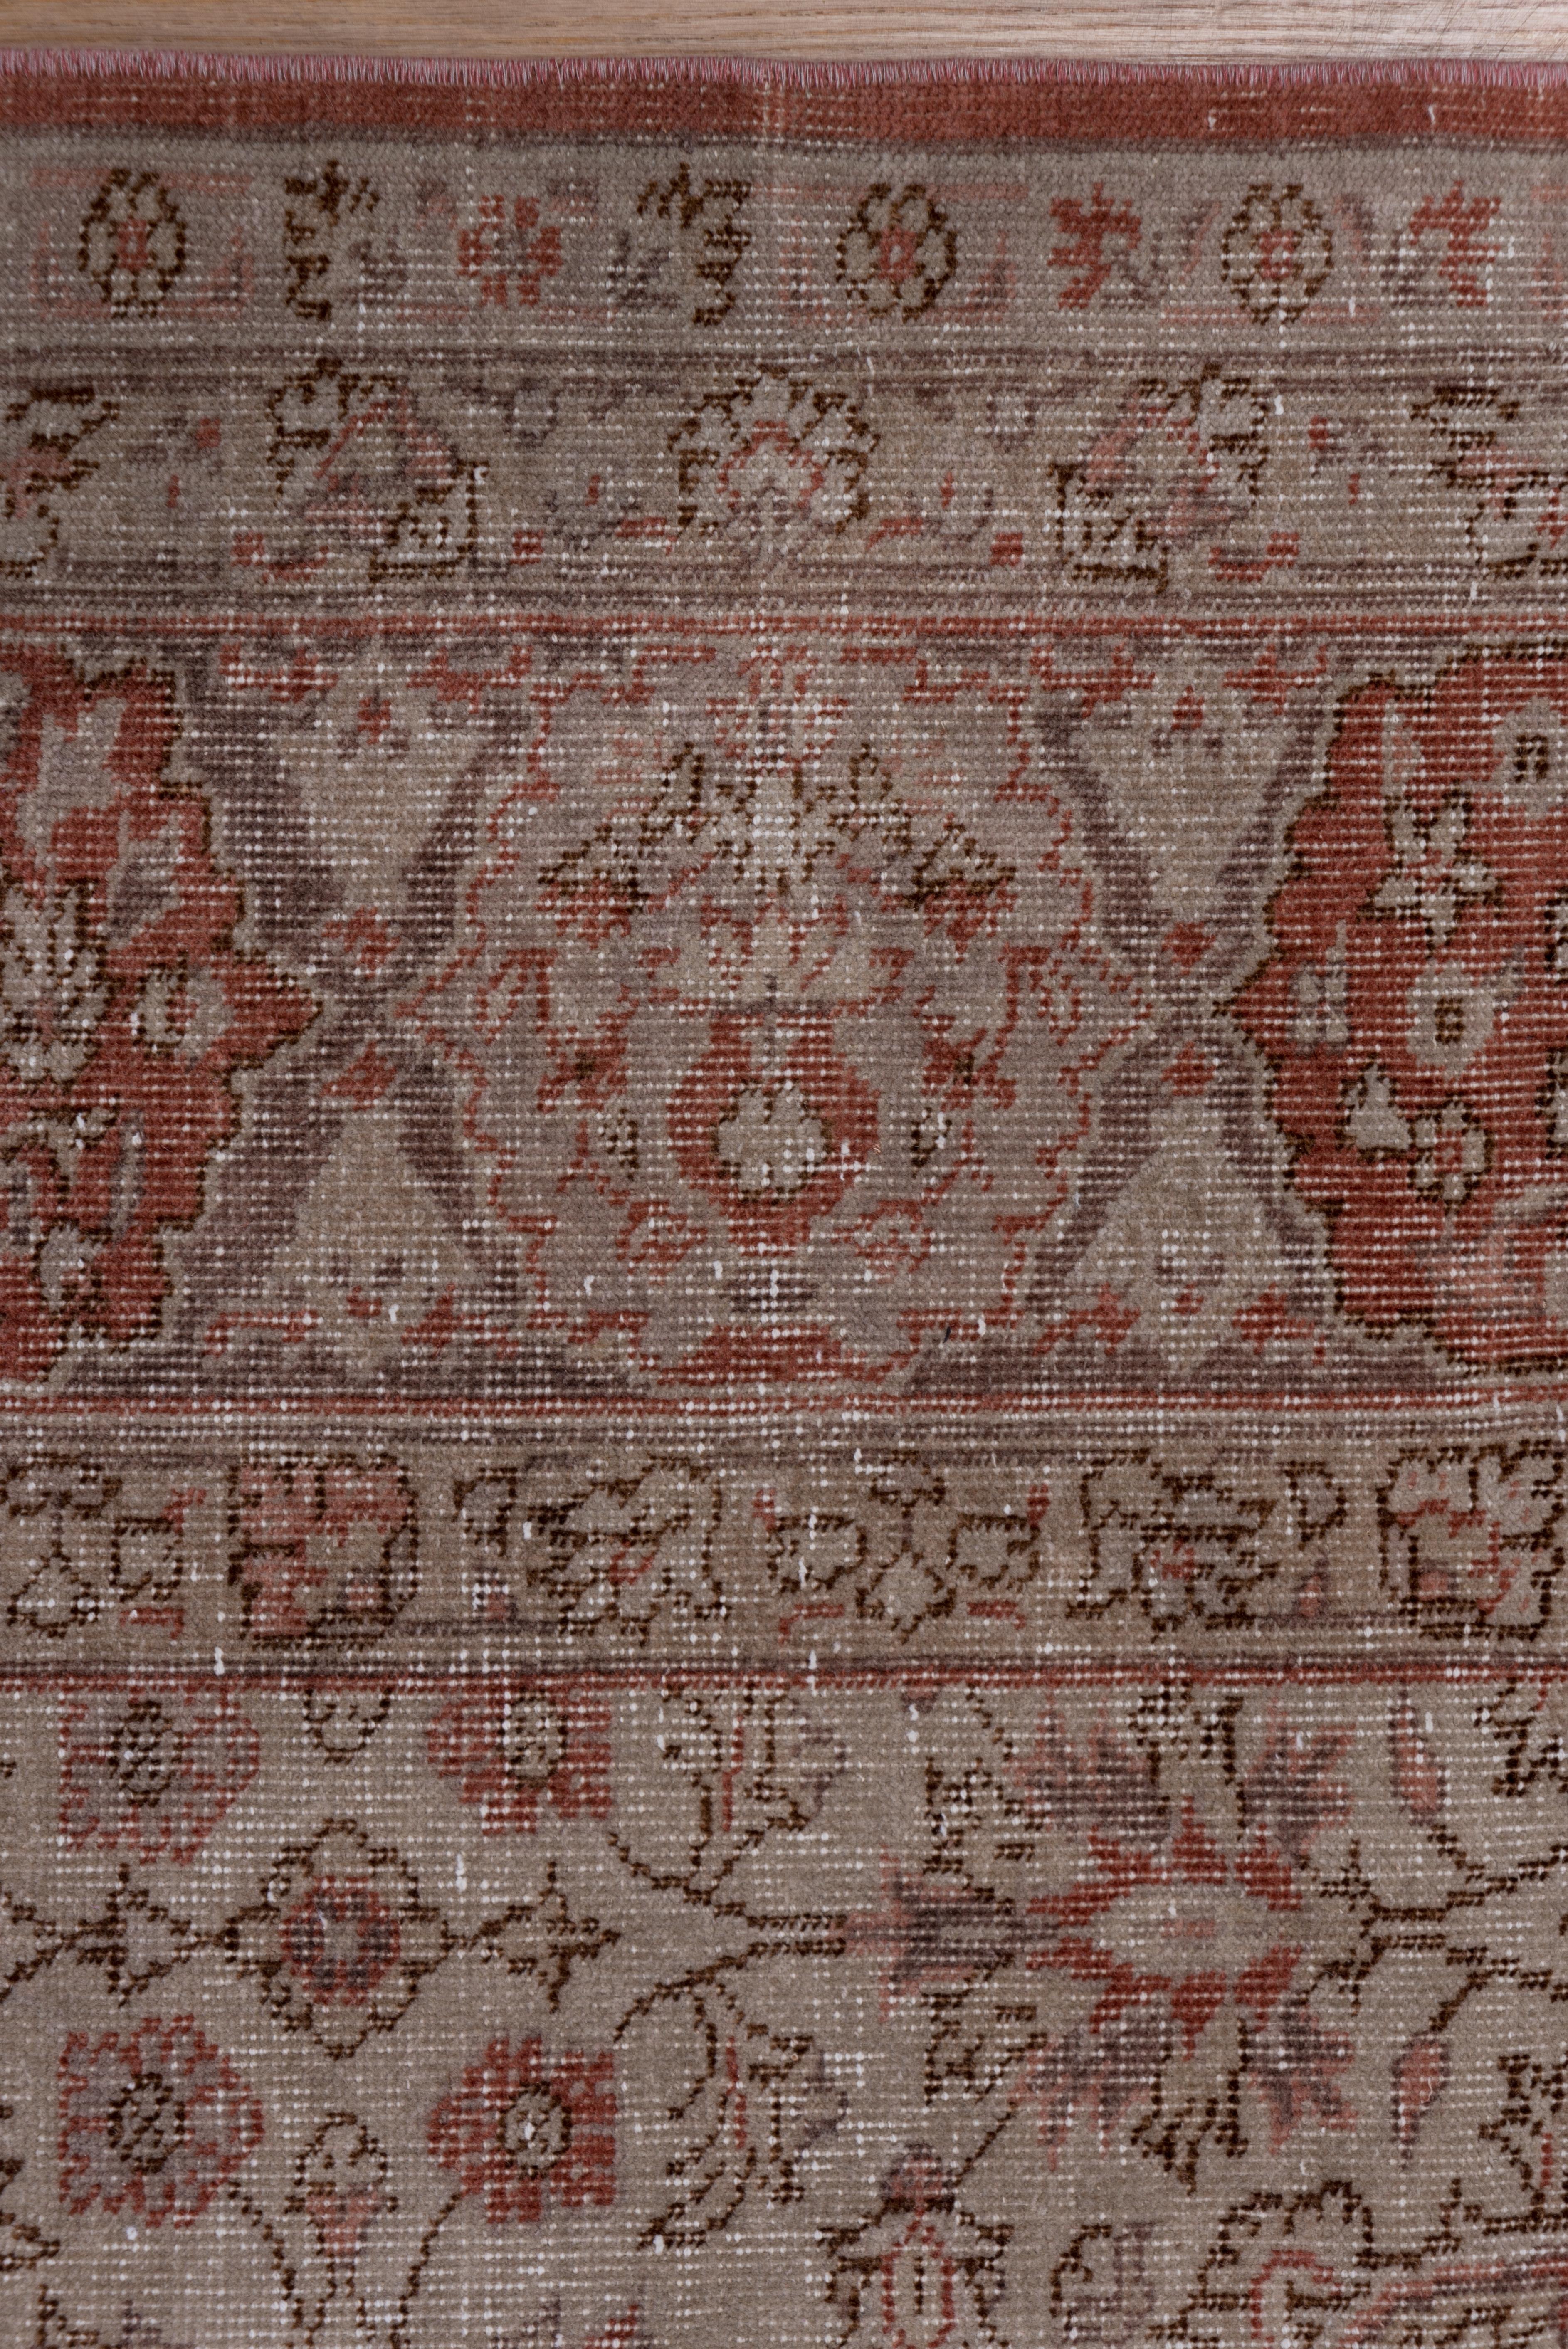 Antique Turkish Oushak Rug, Red Borders, Taupe Allover Field, circa 1940s For Sale 2